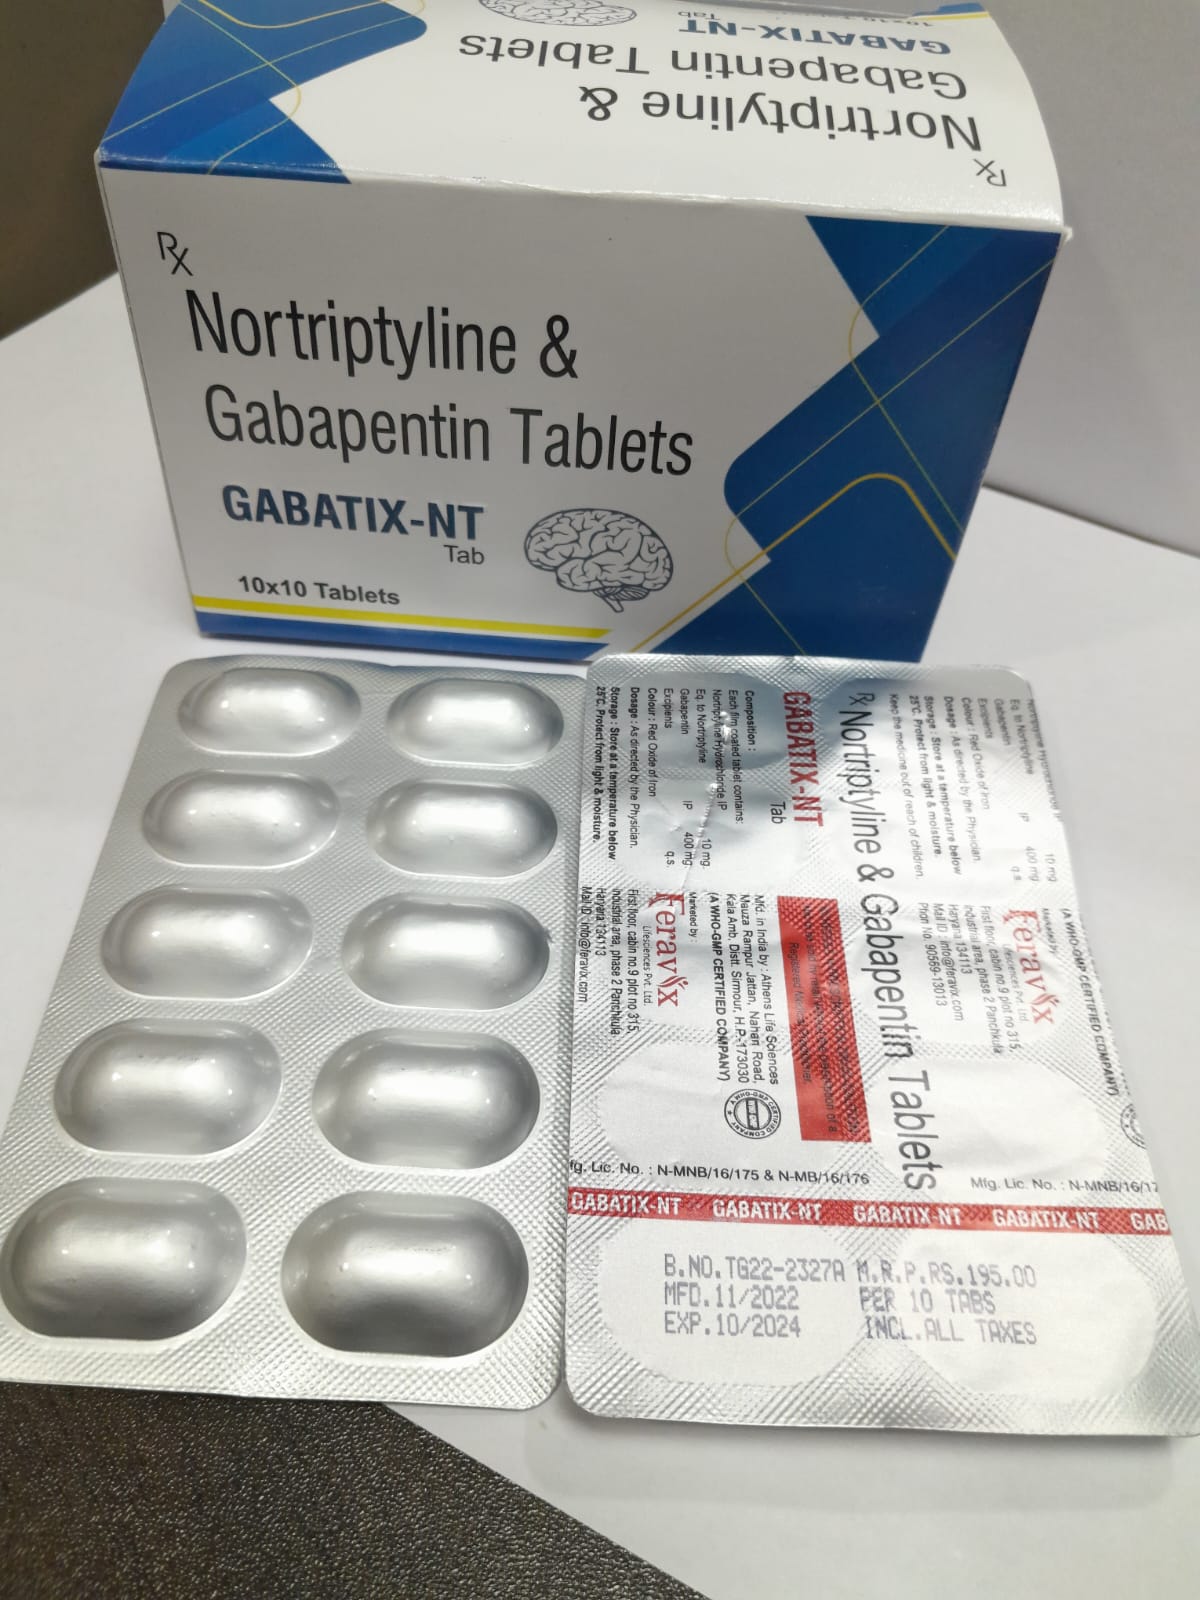 Product Name: GABATIX NT Capsules, Compositions of GABATIX NT Capsules are ACH FILM COATED TABLET CONTAINS: NORTRIPTYLINE HYDROCHLORIDE EQ. TO NORTRIPTYLINE IP 10 MG, GABAPENTIN IP 400 MG - Feravix Lifesciences